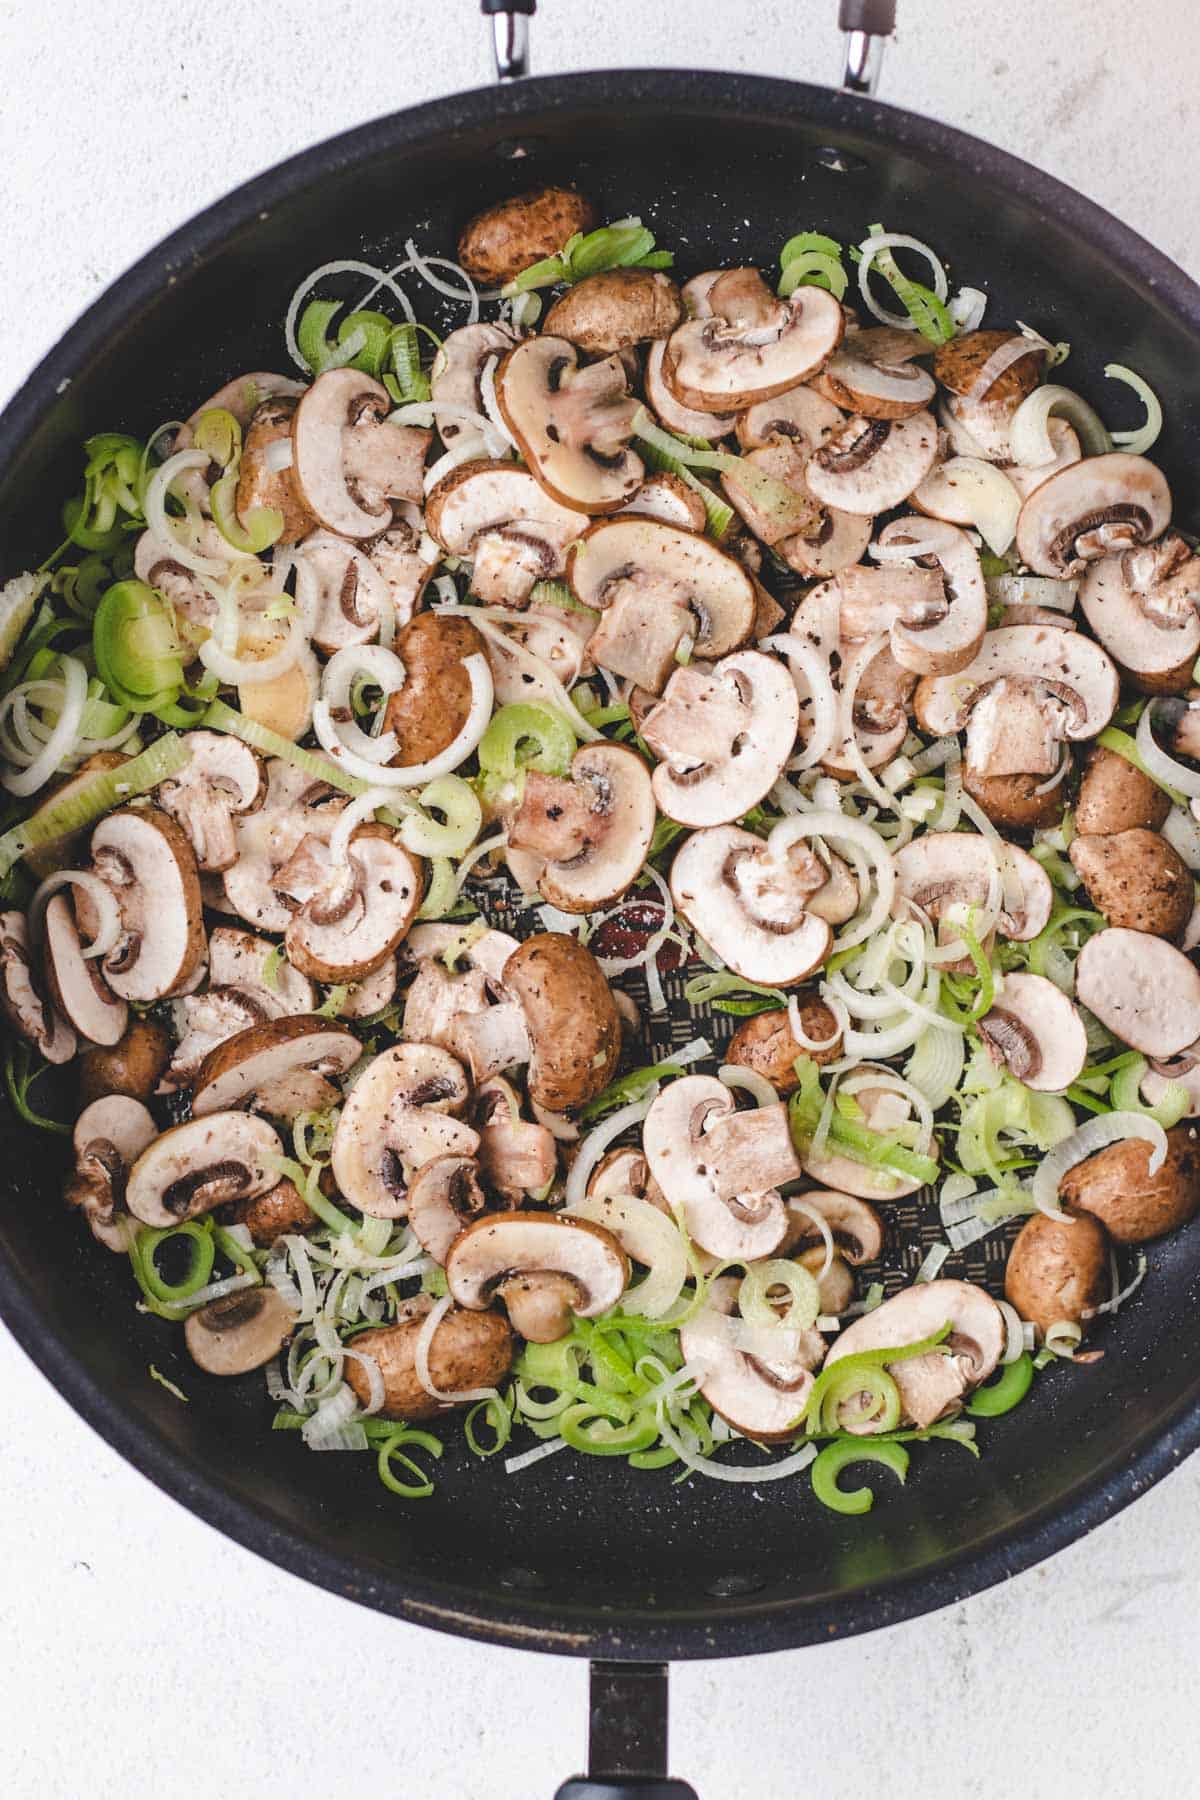 Cooking sliced mushrooms and leeks in a large cast iron skillet.